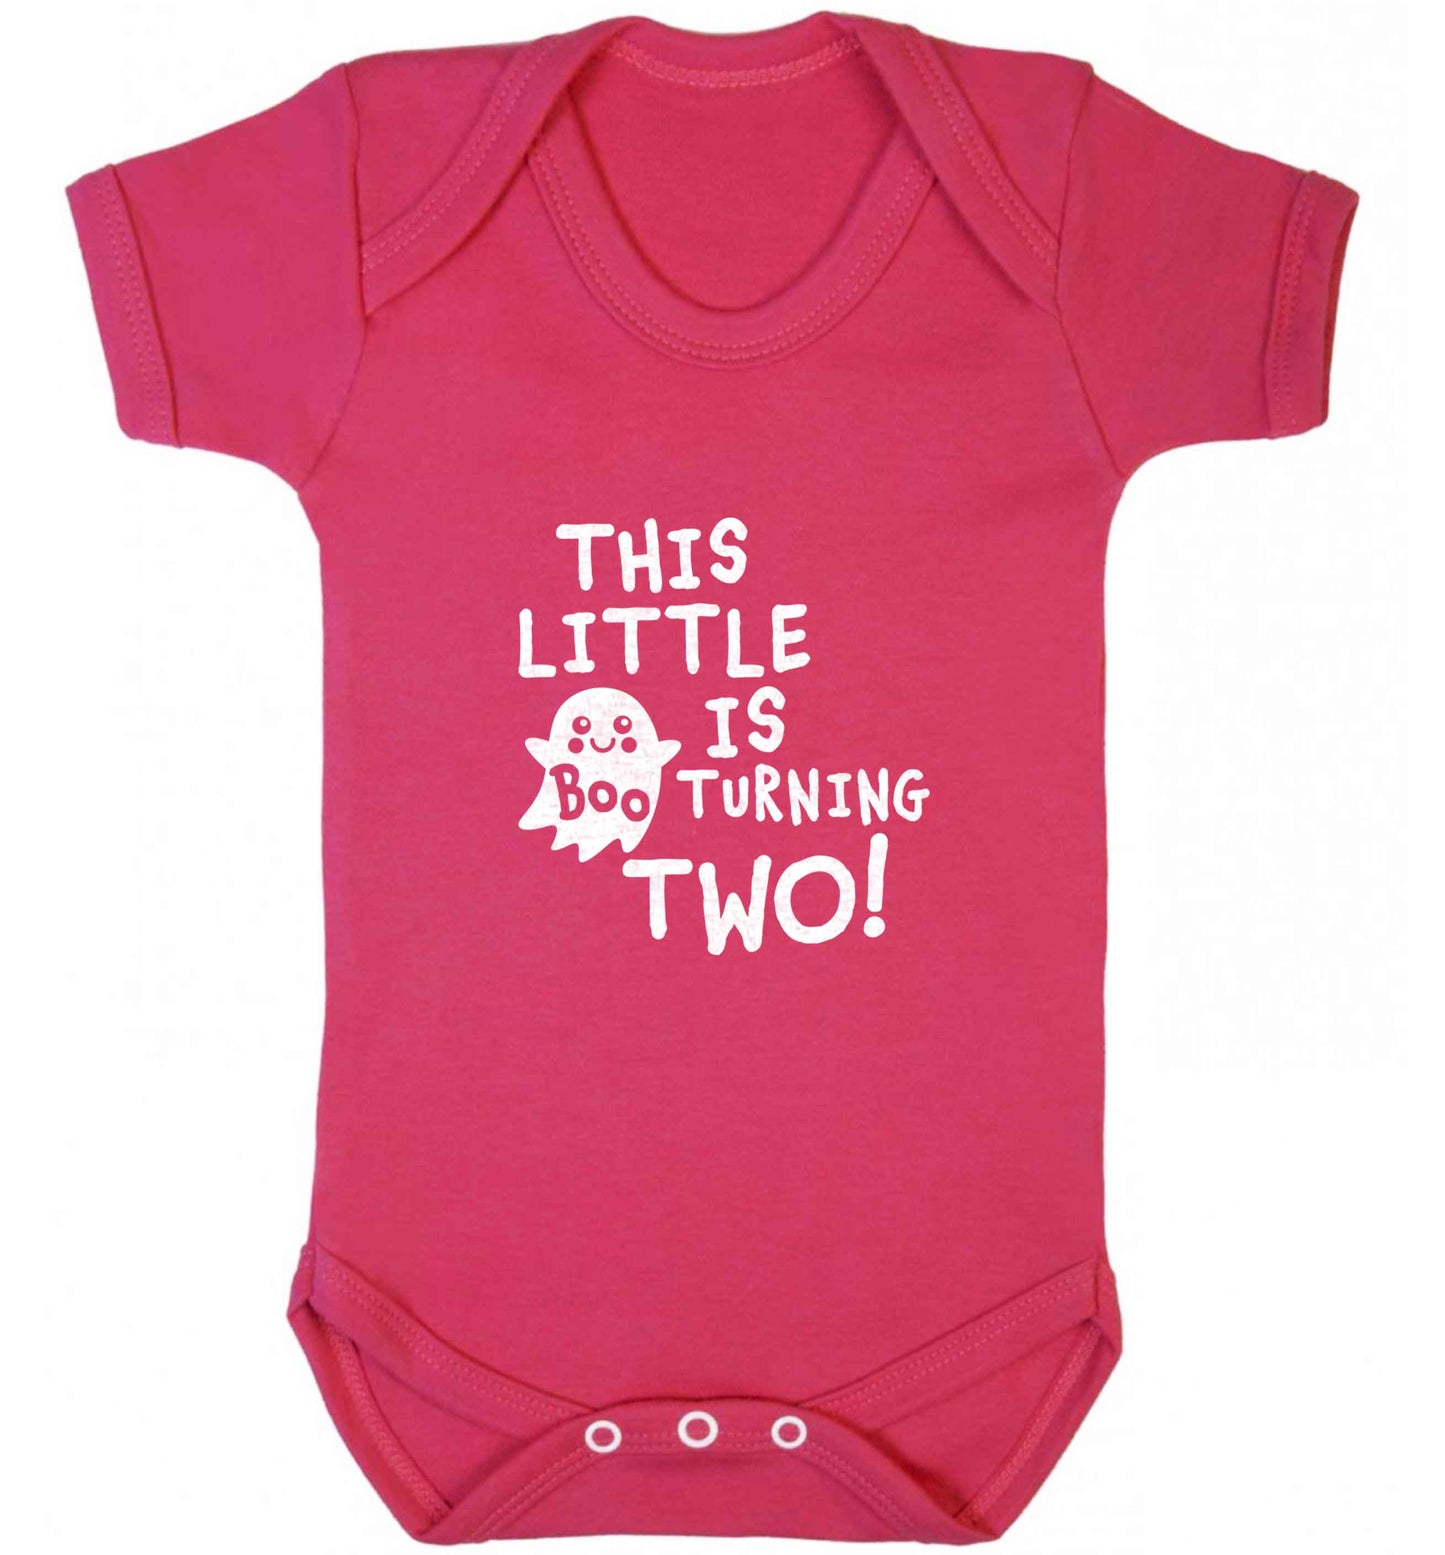 This little boo is turning two baby vest dark pink 18-24 months